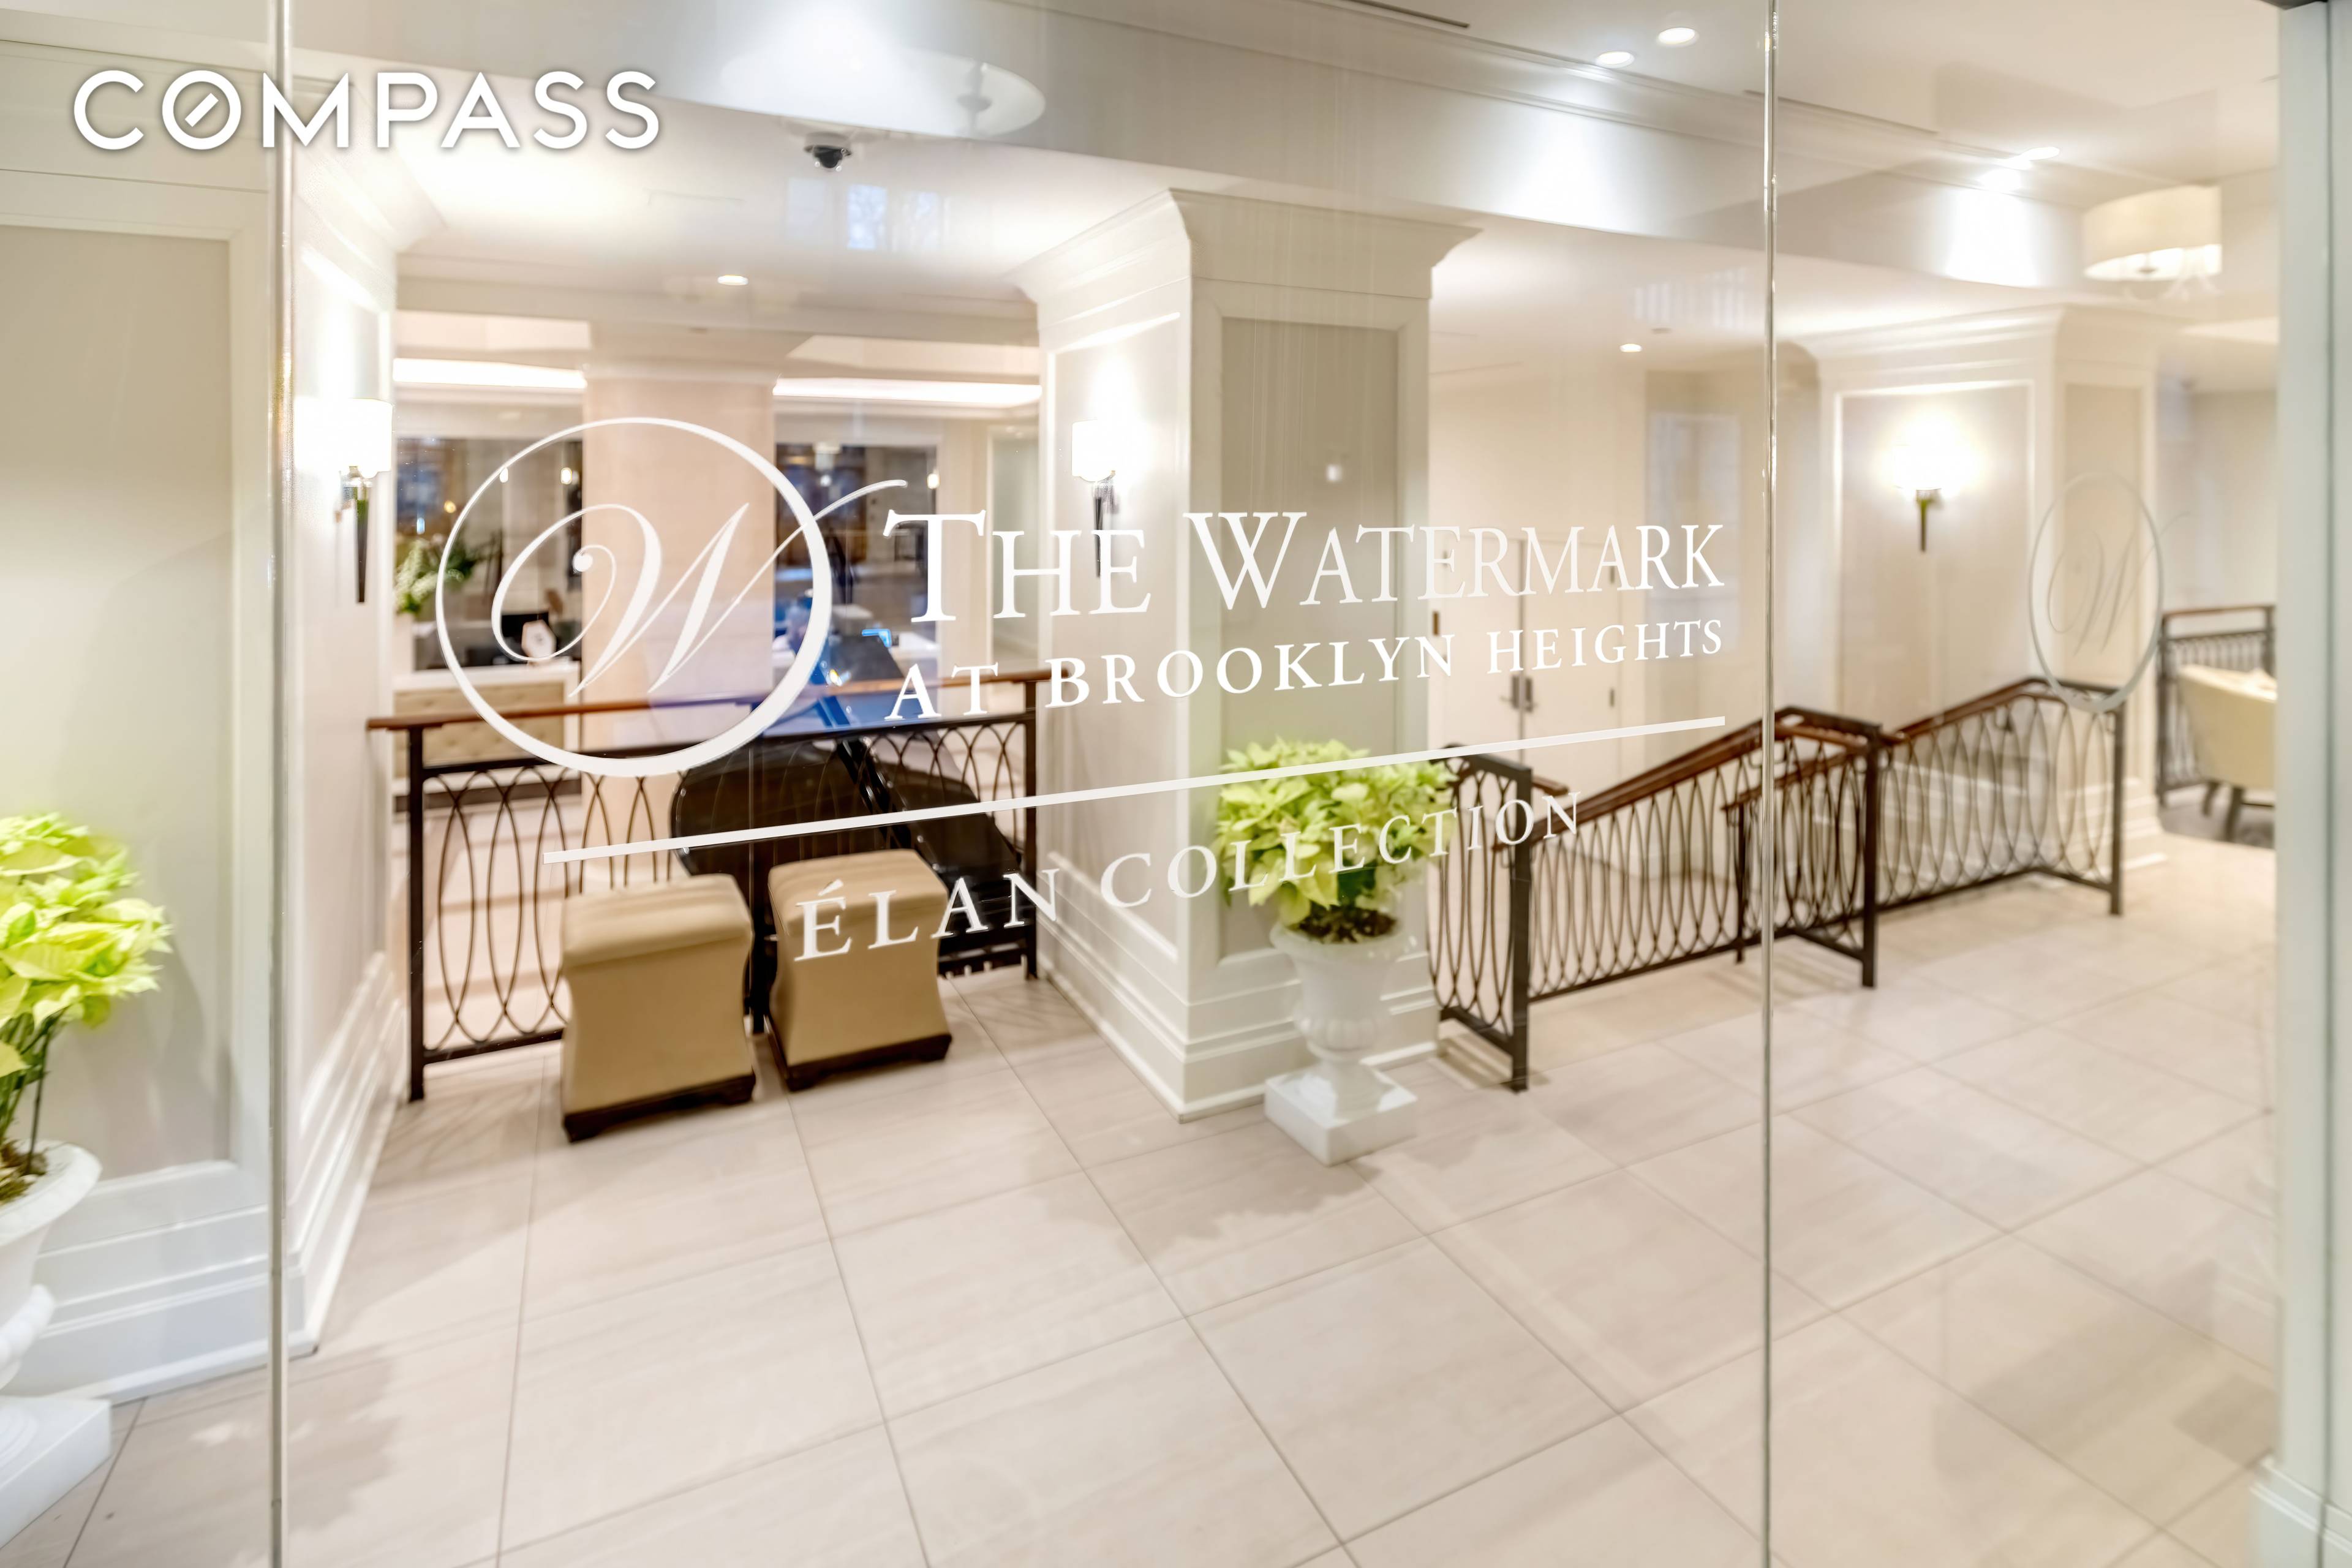 CONTEMPORARY COMFORTABLE CONVENIENT SENIOR LIVING COMMUNITY Apt 1511 Assisted Living Studio The Watermark at Brooklyn Heights is a senior living community located in the historic and beautifully renovated Leverich Towers ...